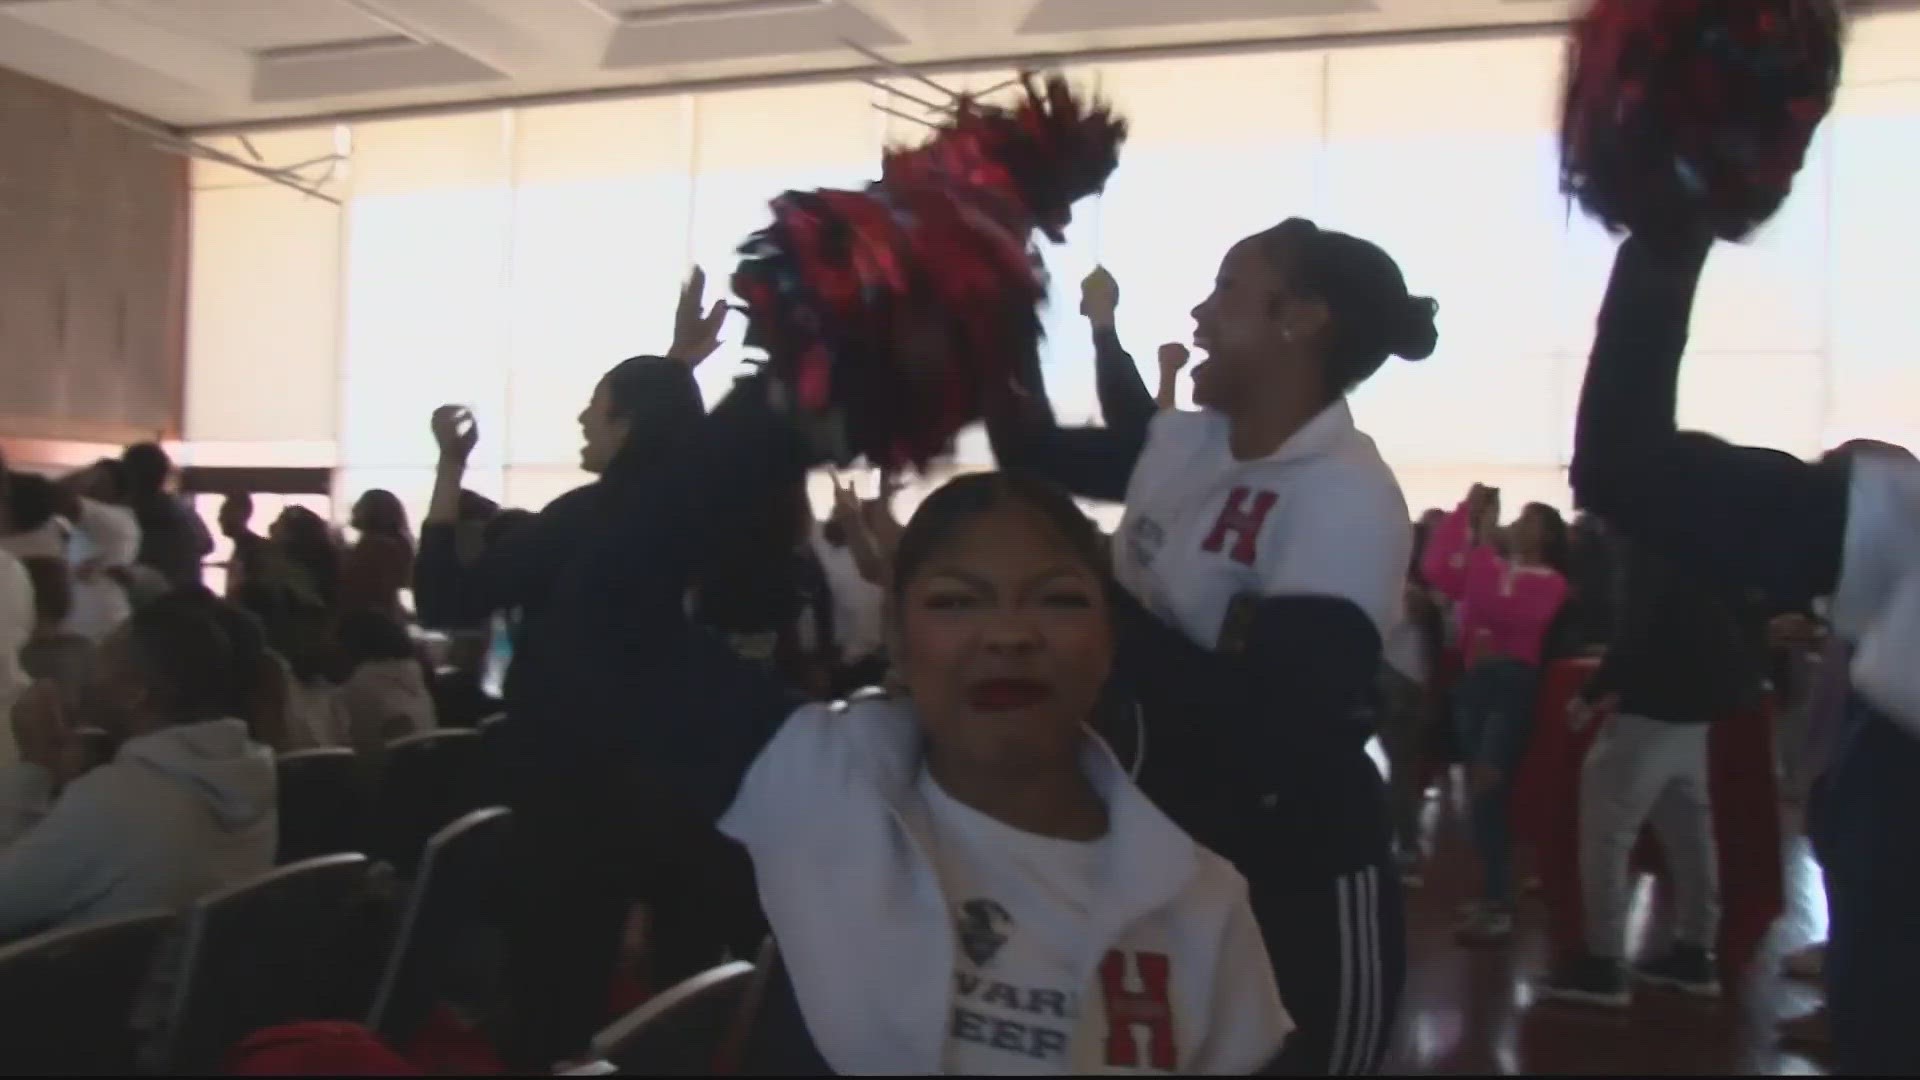 Despite today's NCAA tournament loss -- Howard University fans showed the team a LOT of love at watch parties today.